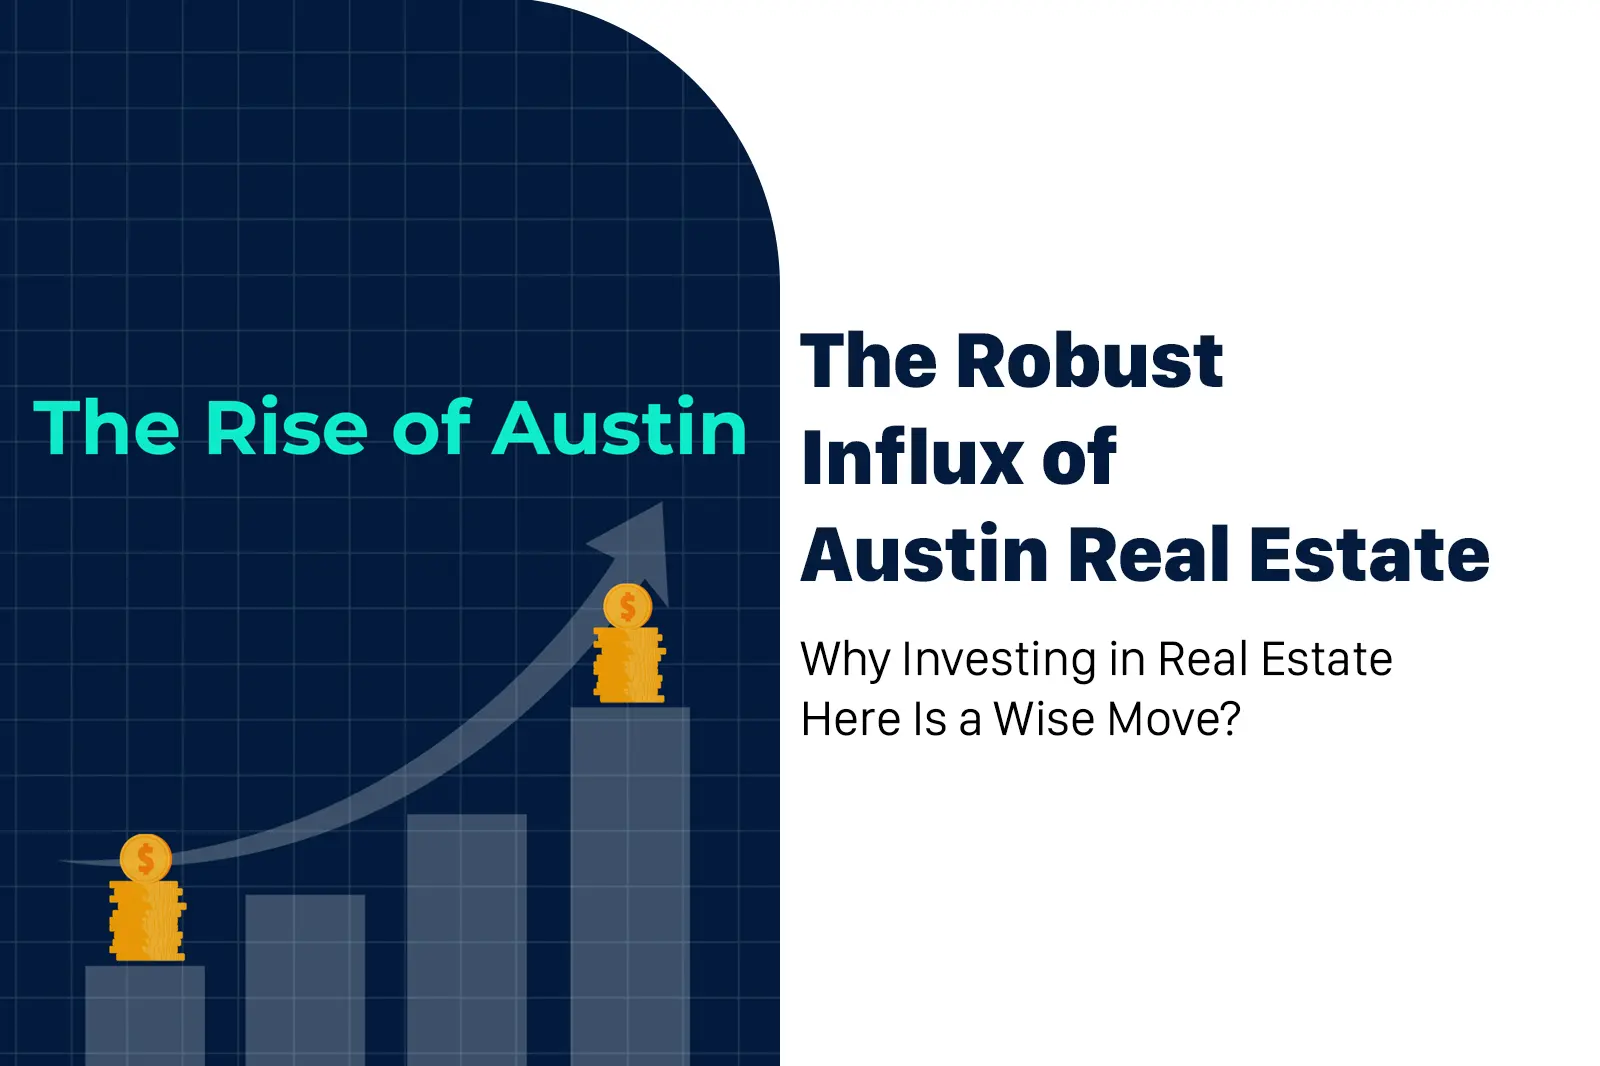 Why Investing in Austin U.S. Real Estate Here Is a Wise Move?